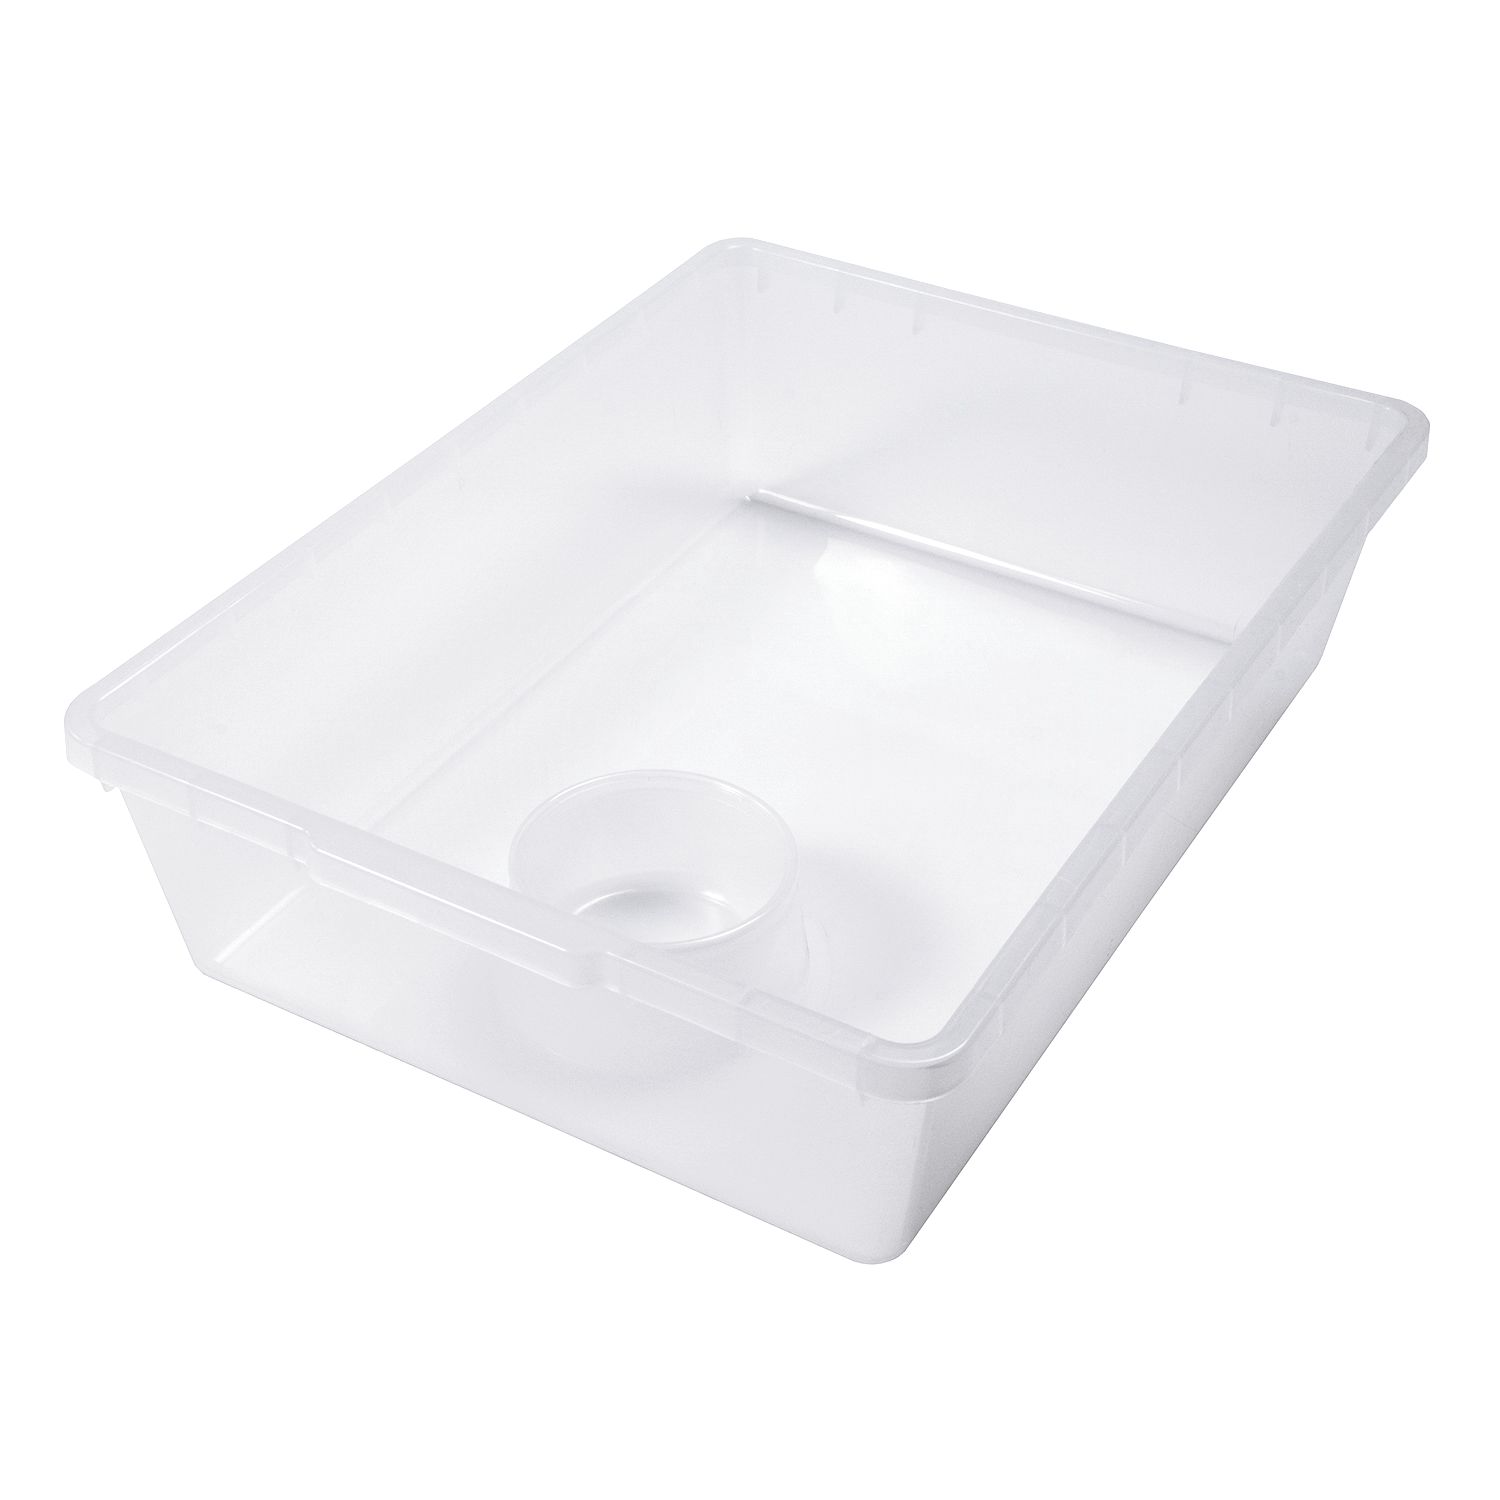 https://www.visionproducts.us/wp-content/uploads/2023/03/vision_products_tub_v35_clear_bowl.jpg